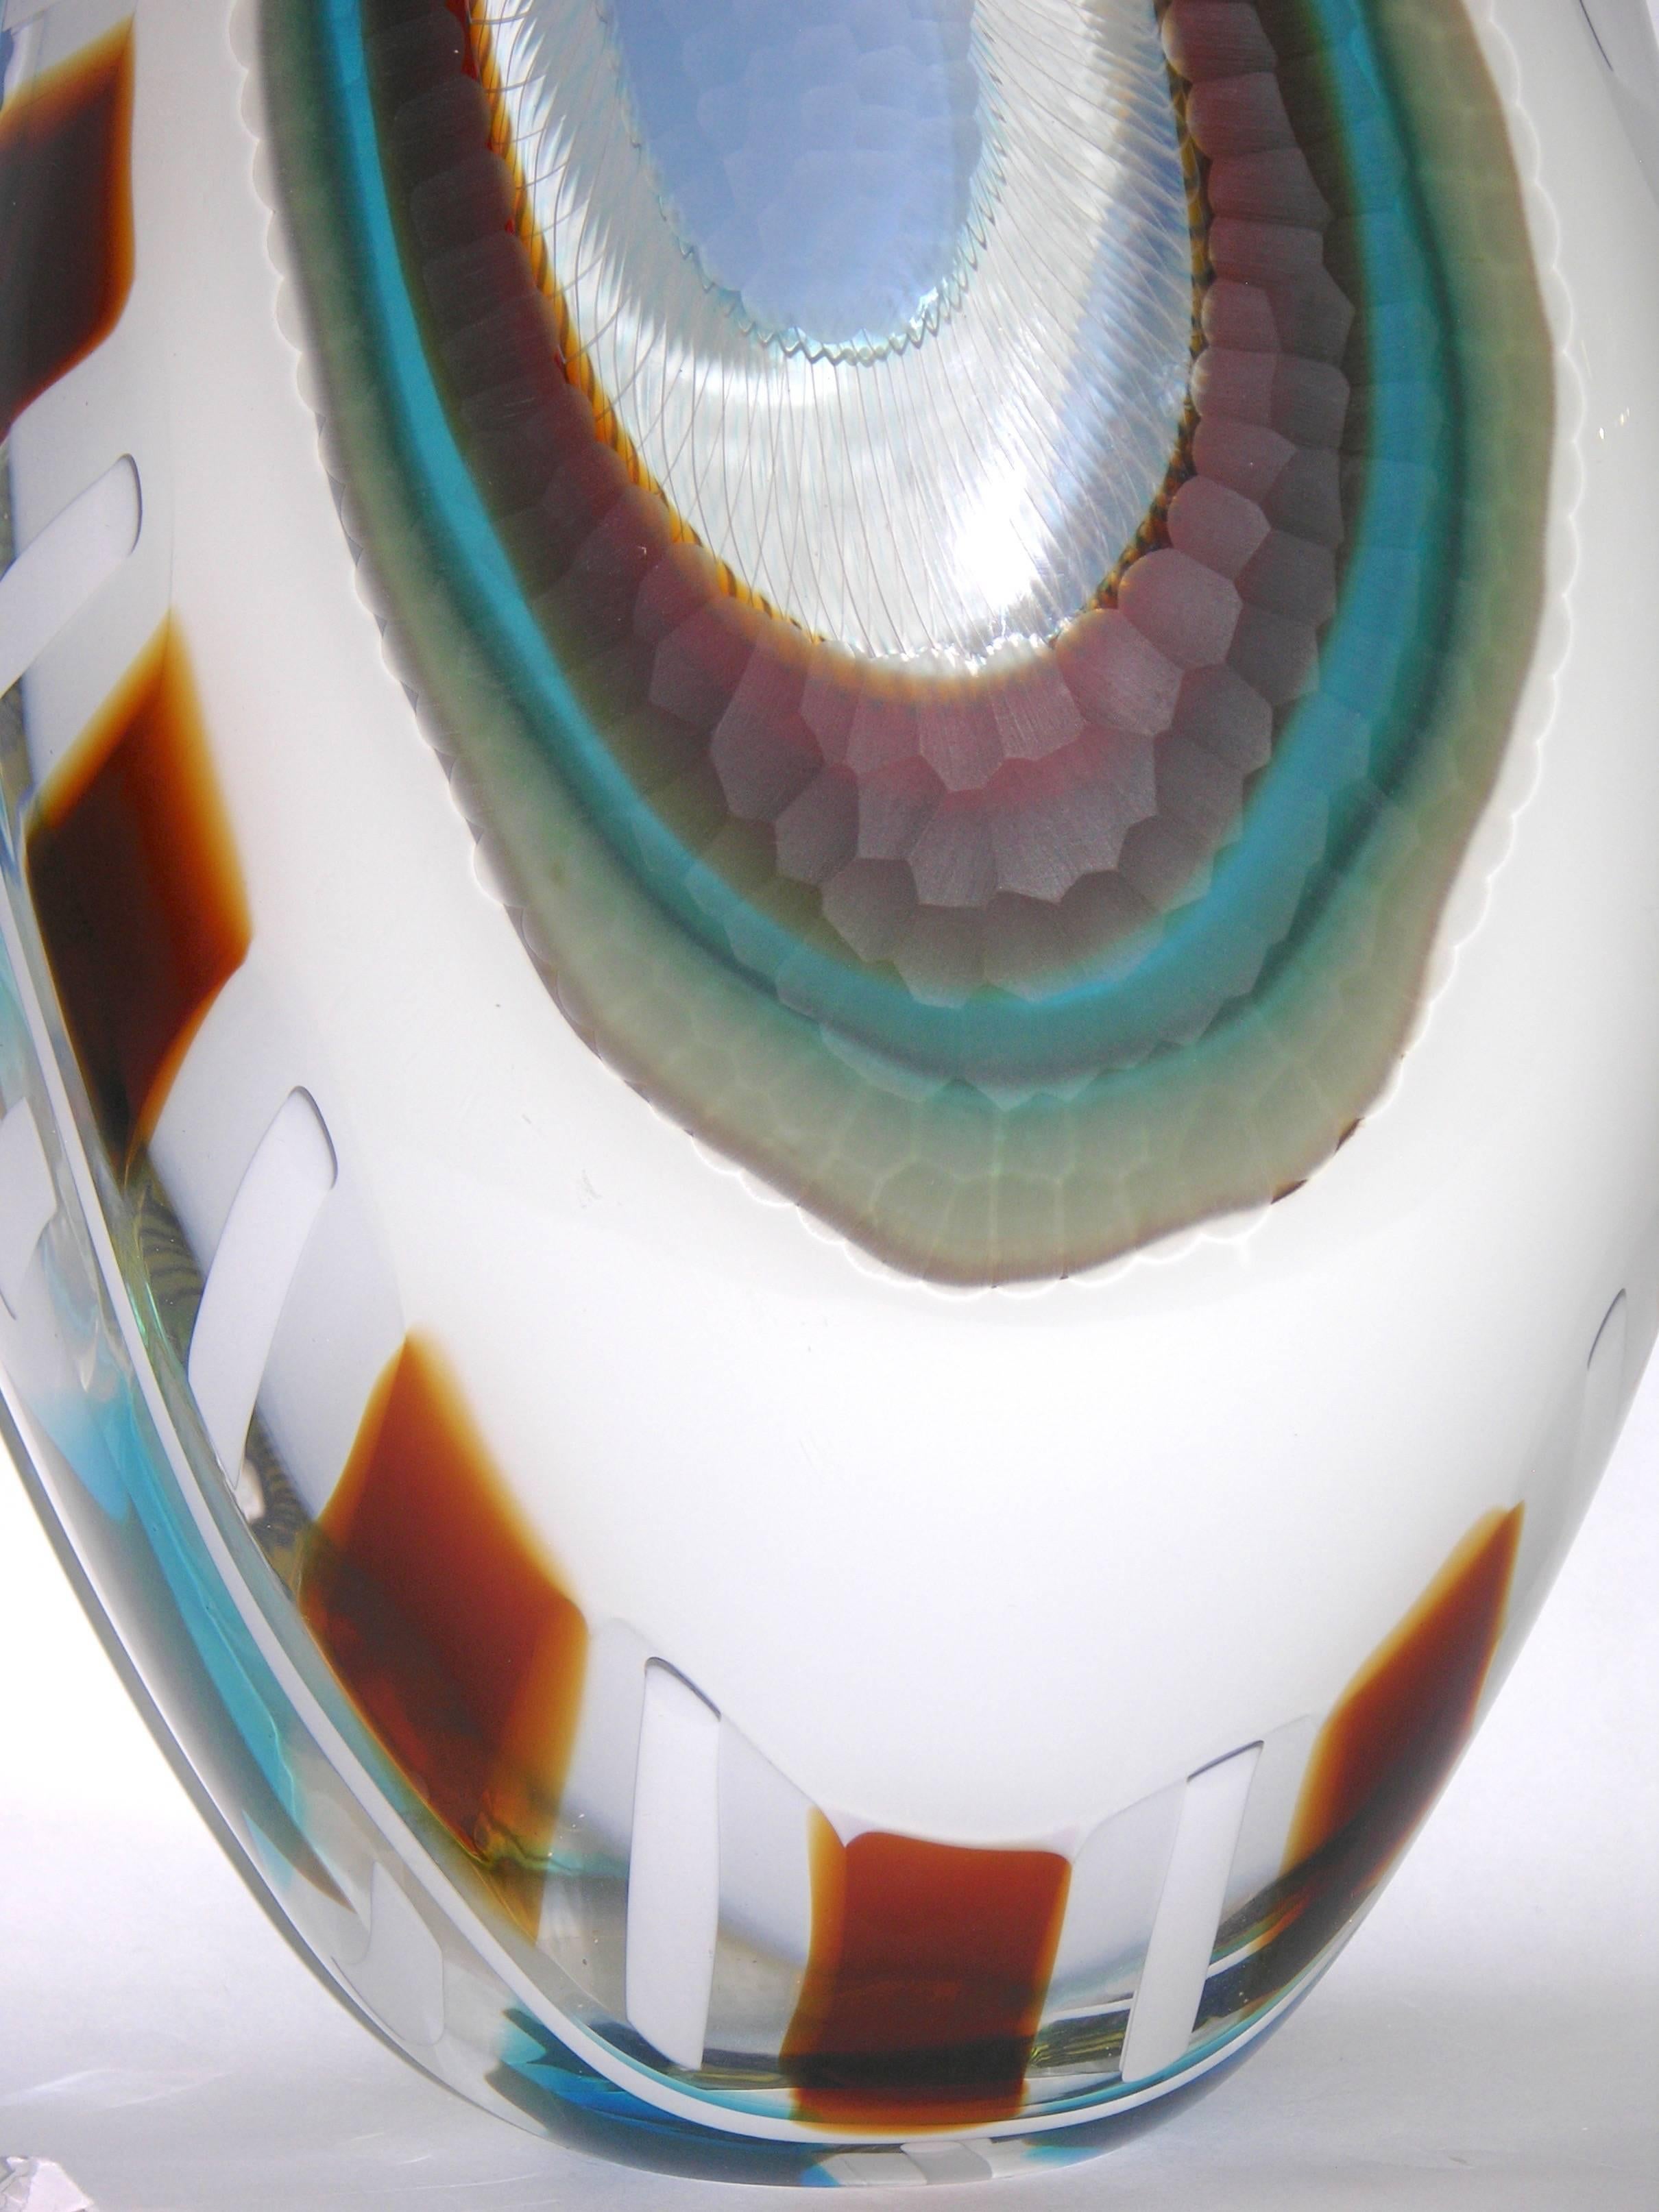 1990 Afro Celotto Modern Art Glass Bowl with Murrine Exclusive for Seguso 1